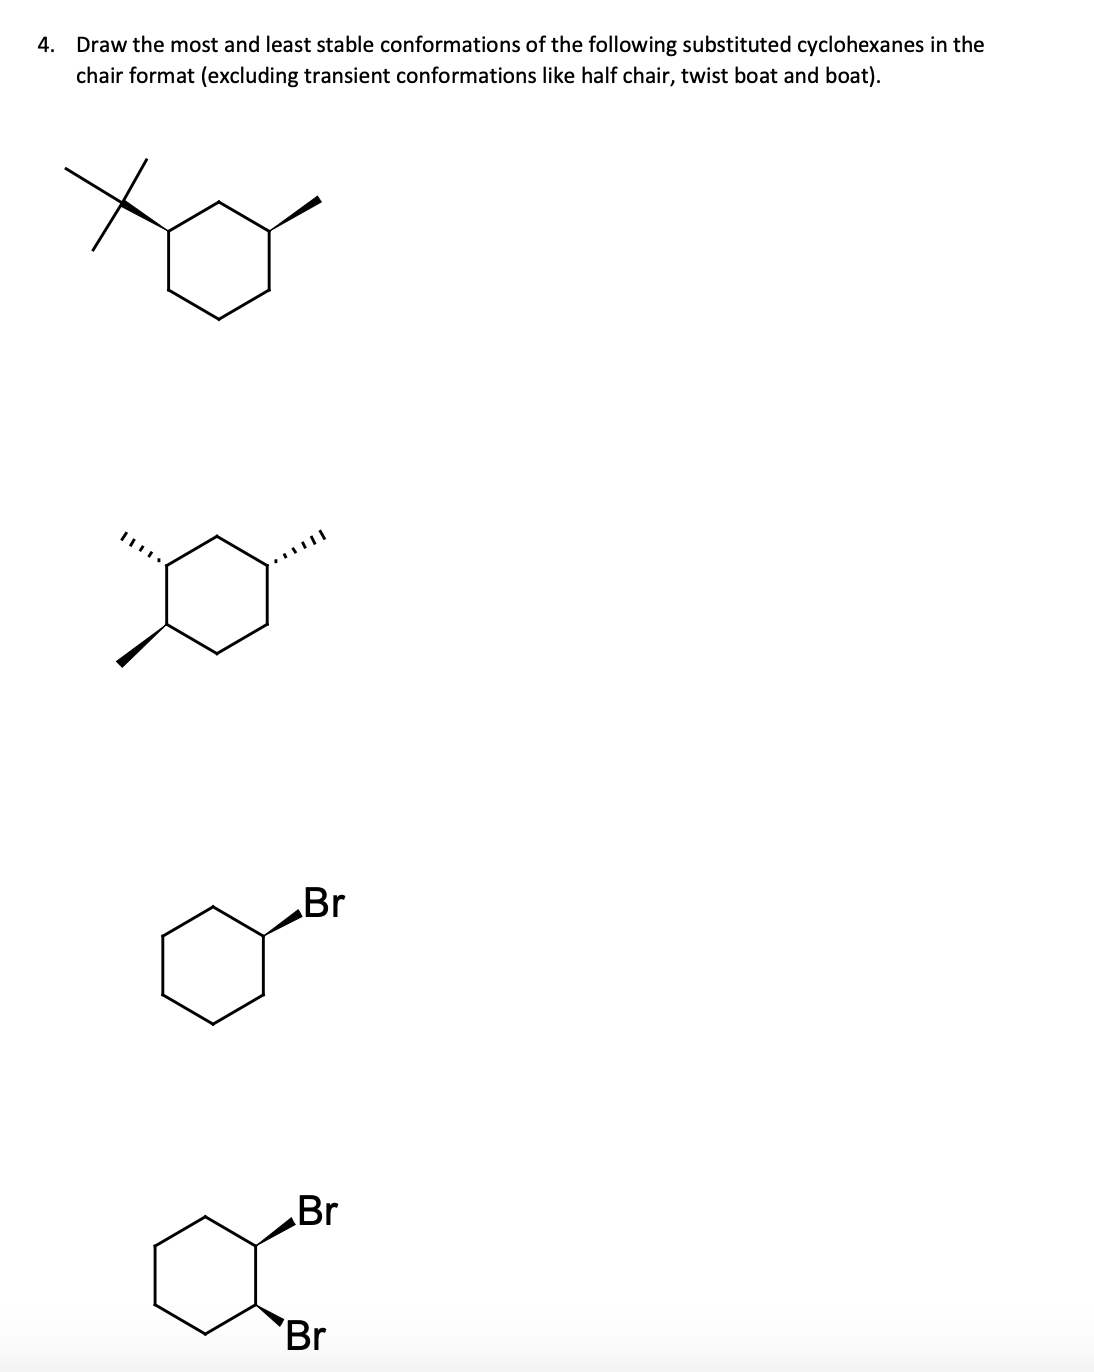 Draw the most and least stable conformations of the following substituted cyclohexanes in the
chair format (excluding transient conformations like half chair, twist boat and boat).
